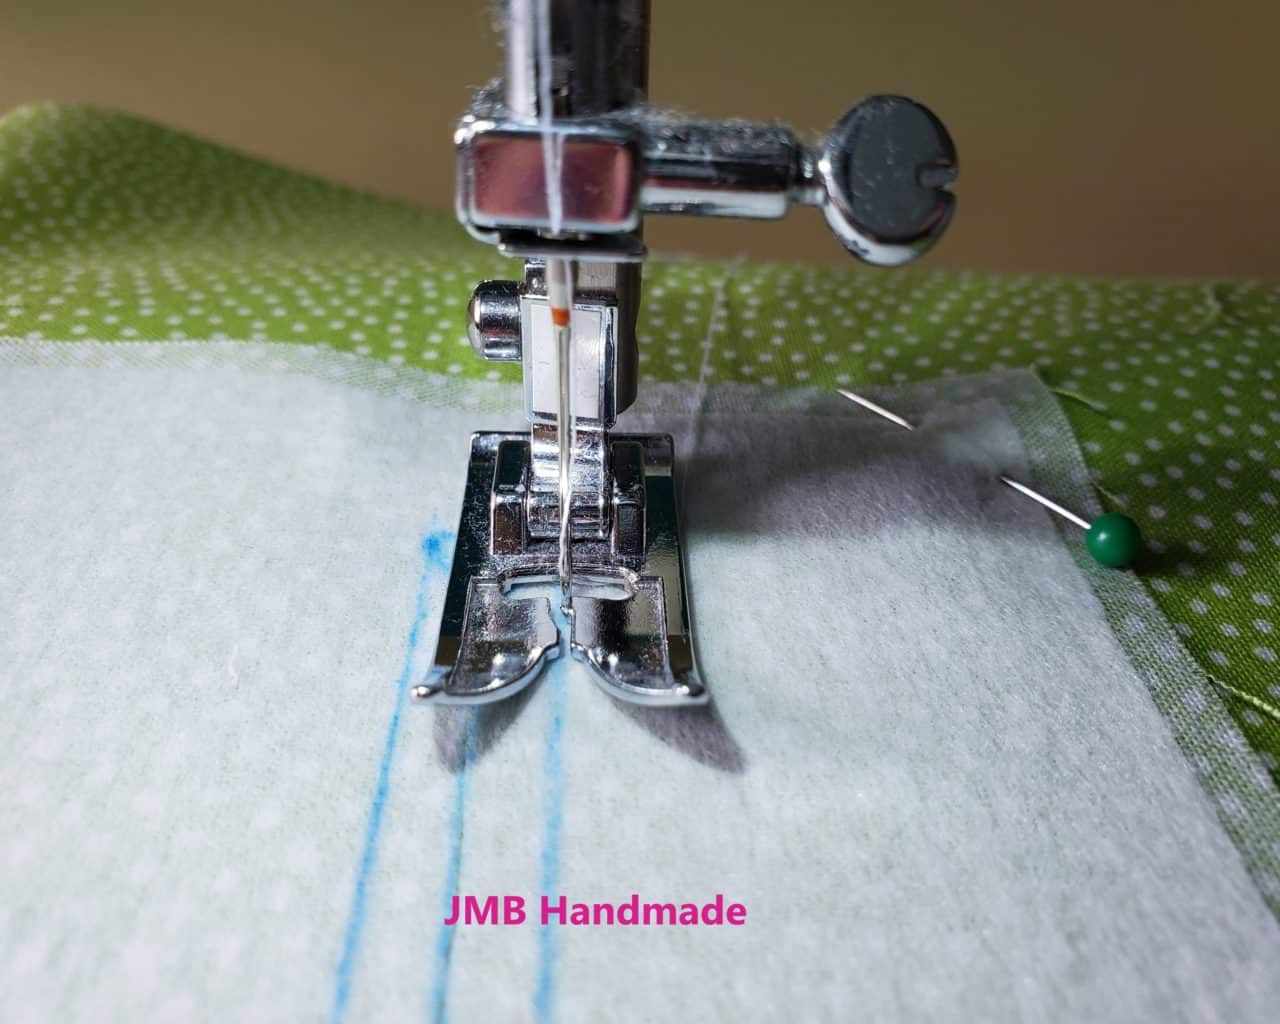 Sewing machine zipper foot used to sew outline of zippered pocket opening